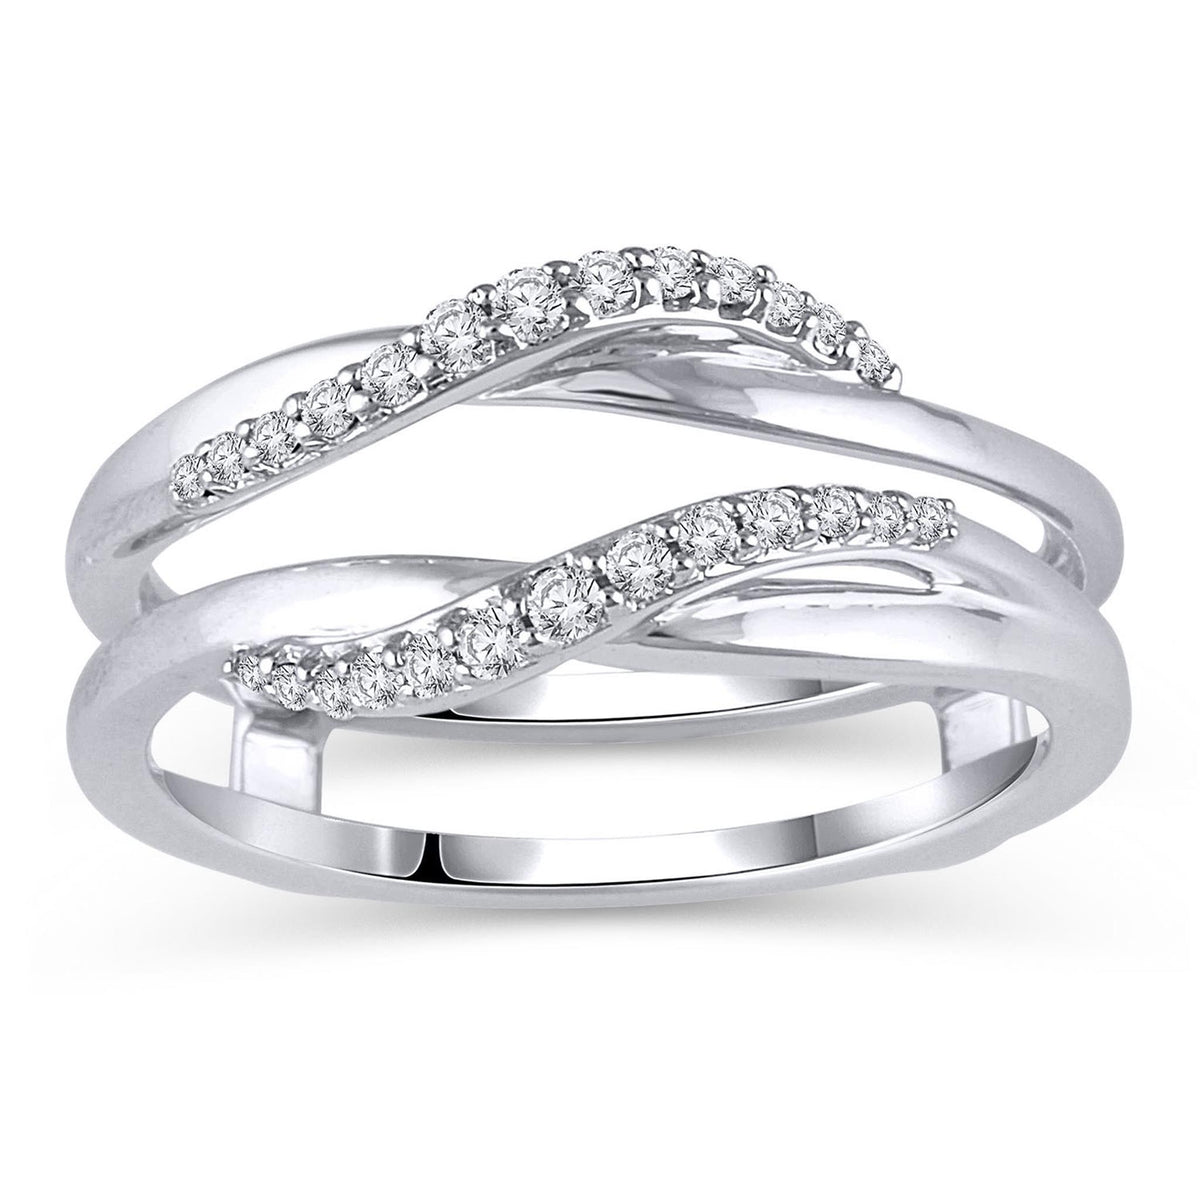 14Kt White Gold Guard / Wrap Ring With 0.16cttw Natural Diamonds